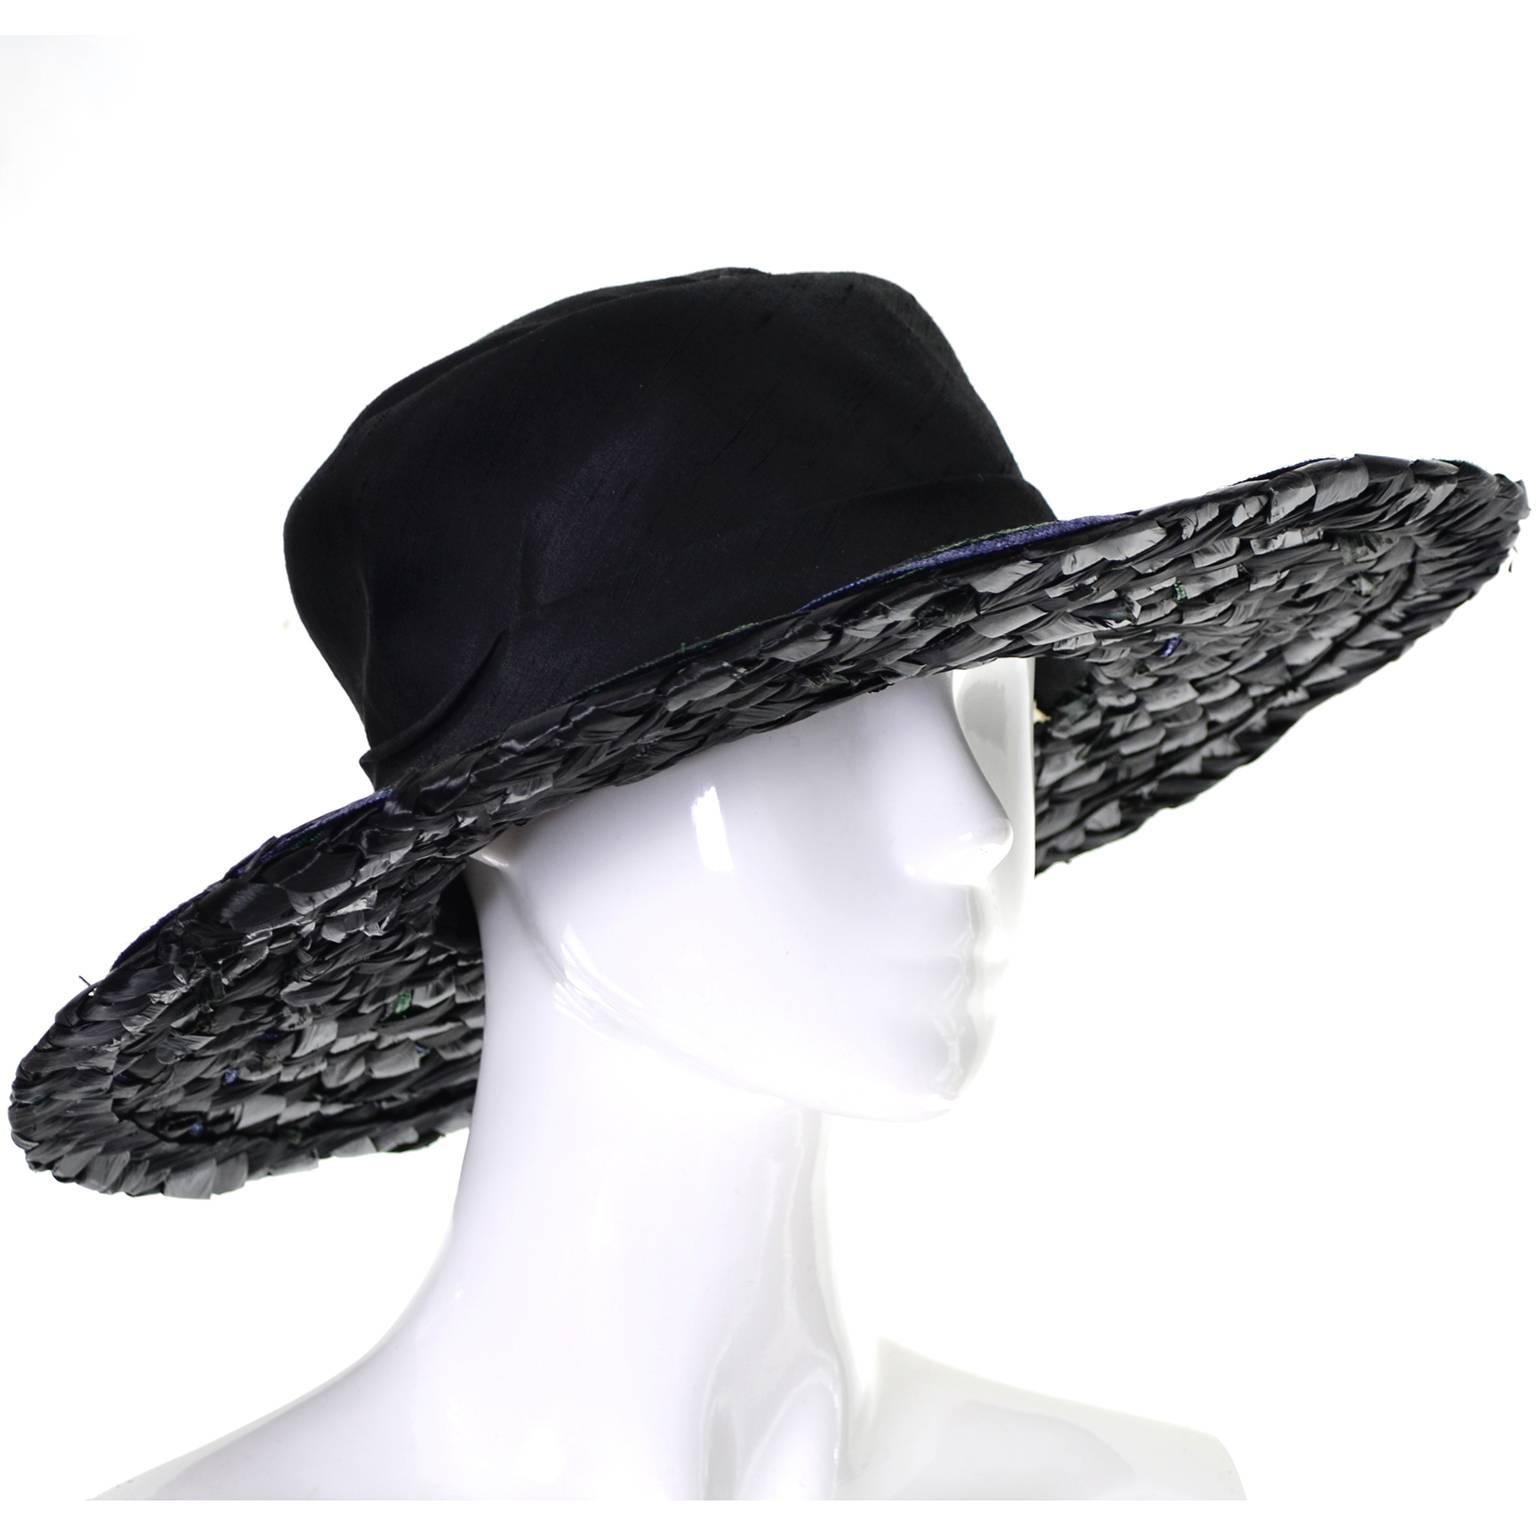 This vintage hat was designed by Elsa Schiaparelli in the 1960's.  The brim of the hat has woven straw in shades of purple, turquoise and black, and the crown is made of black raw silk.  The inside band circumference is 23